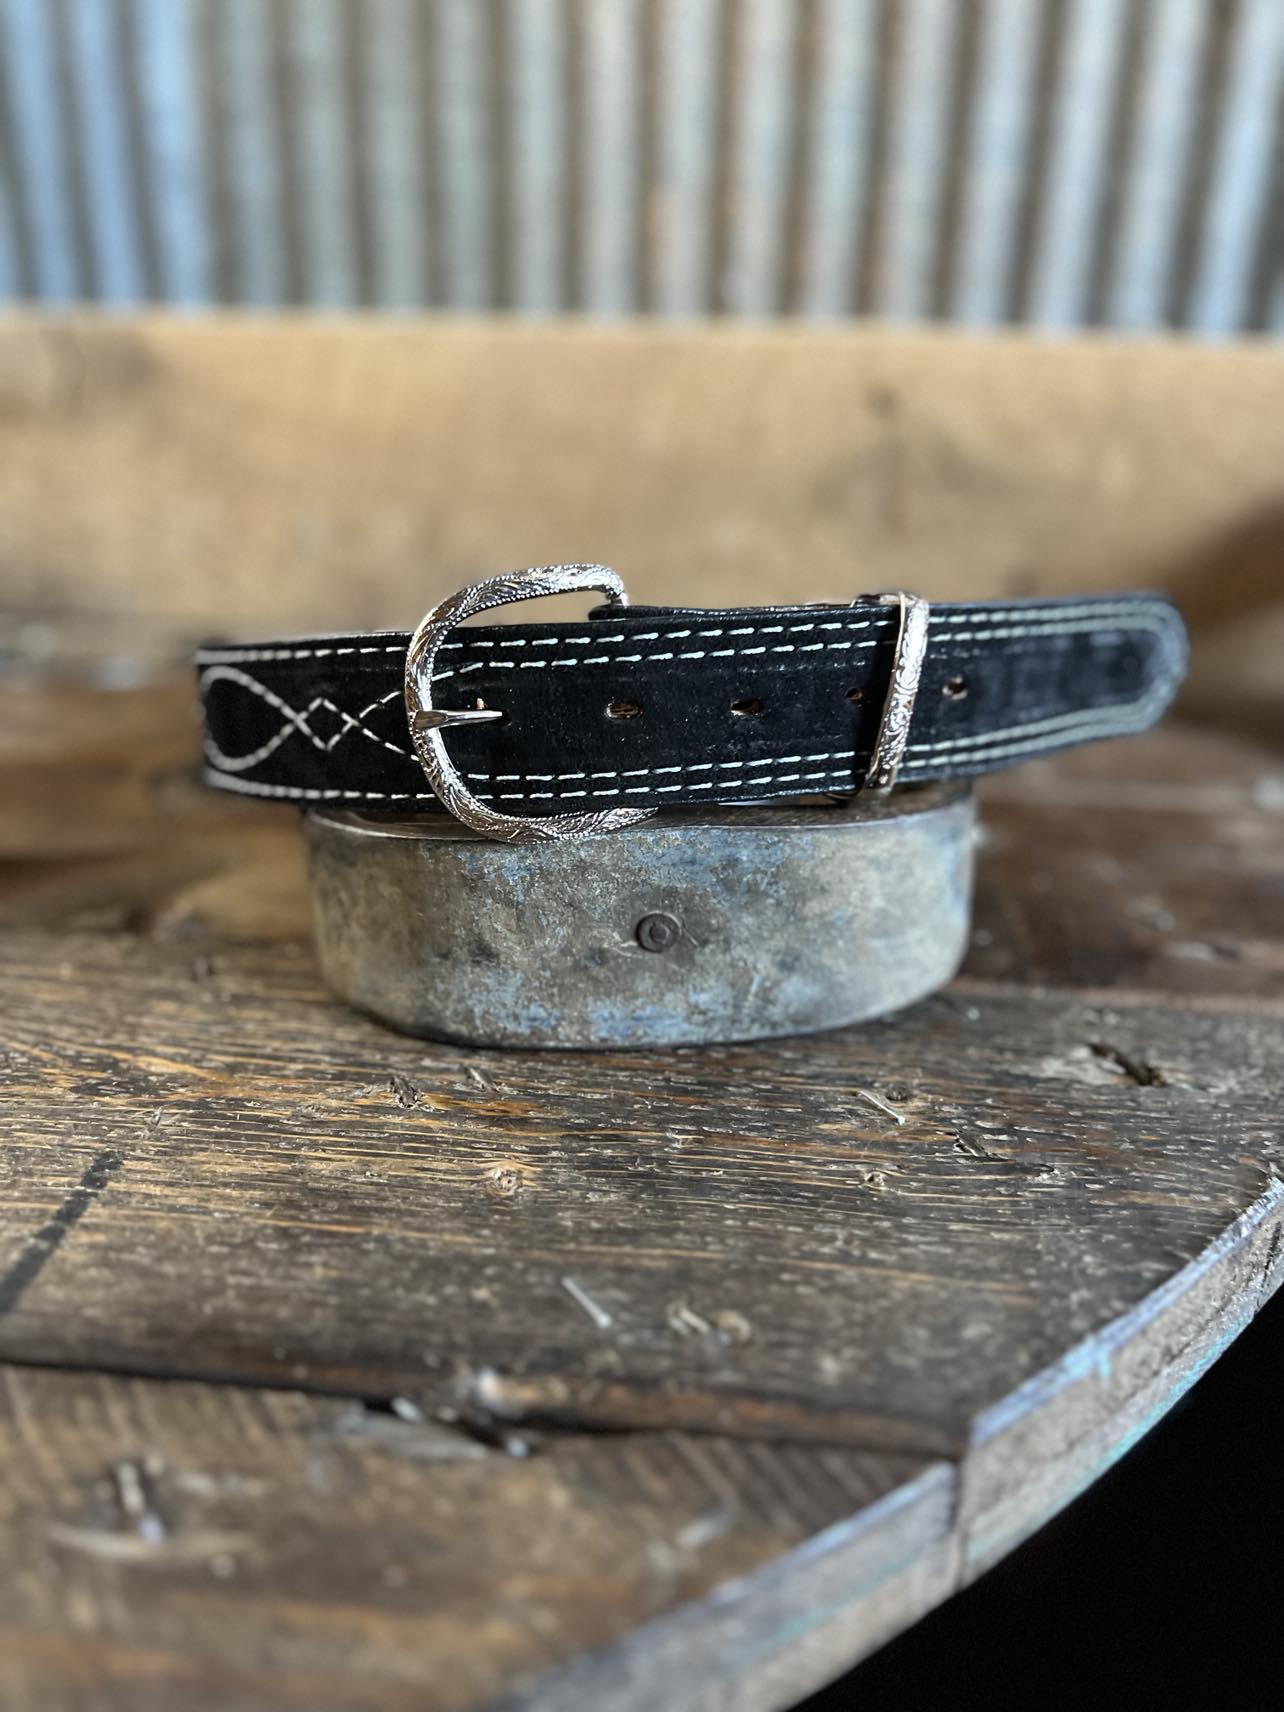 B1194 - Black Suede Belt-Belts-DOUBLE J SADDLERY-Lucky J Boots & More, Women's, Men's, & Kids Western Store Located in Carthage, MO